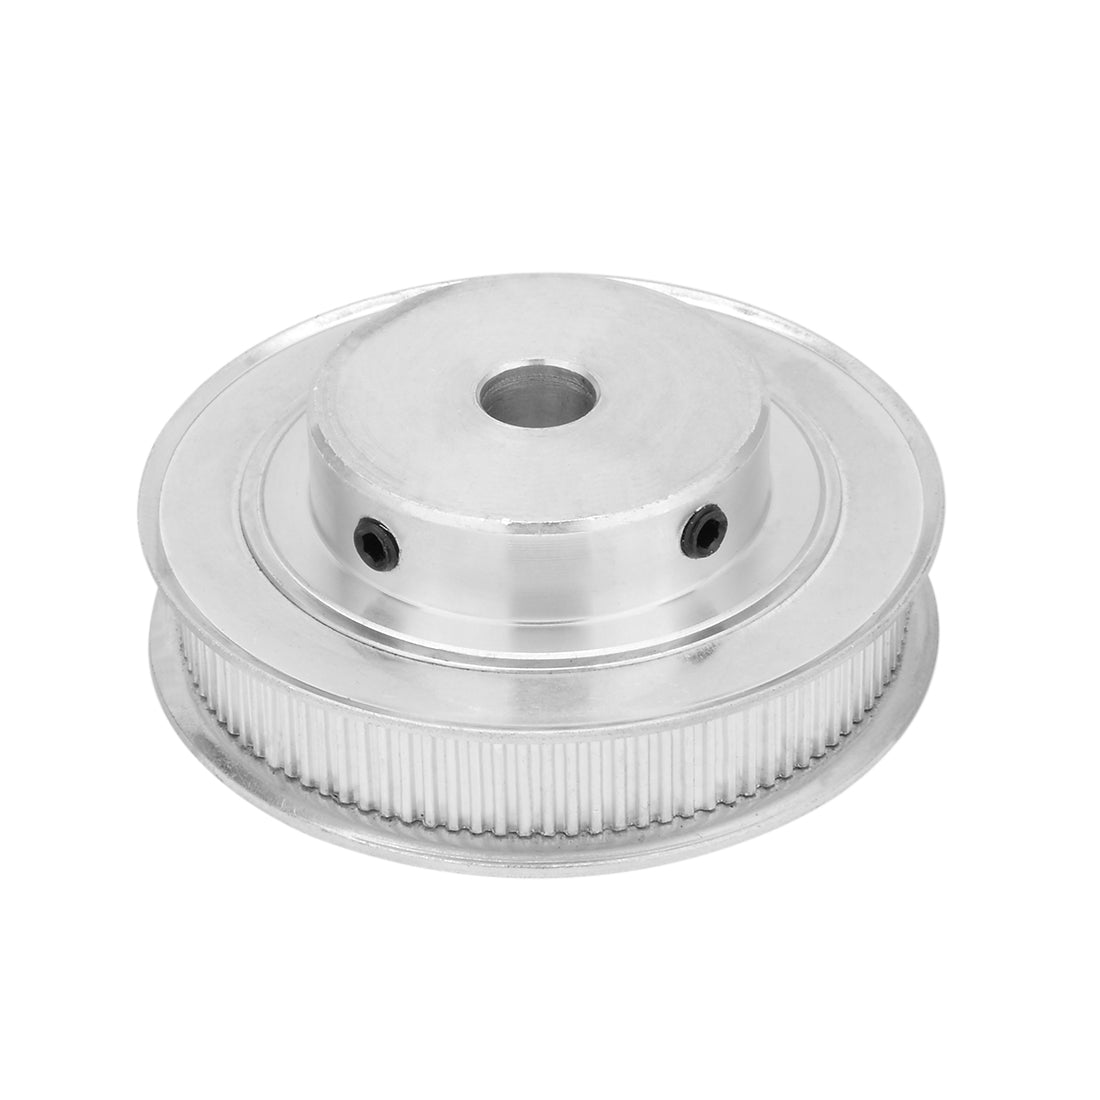 uxcell Uxcell Aluminum 100 Teeth 10mm Bore 2.032mm Pitch Timing Belt Pulley for 10mm Belt